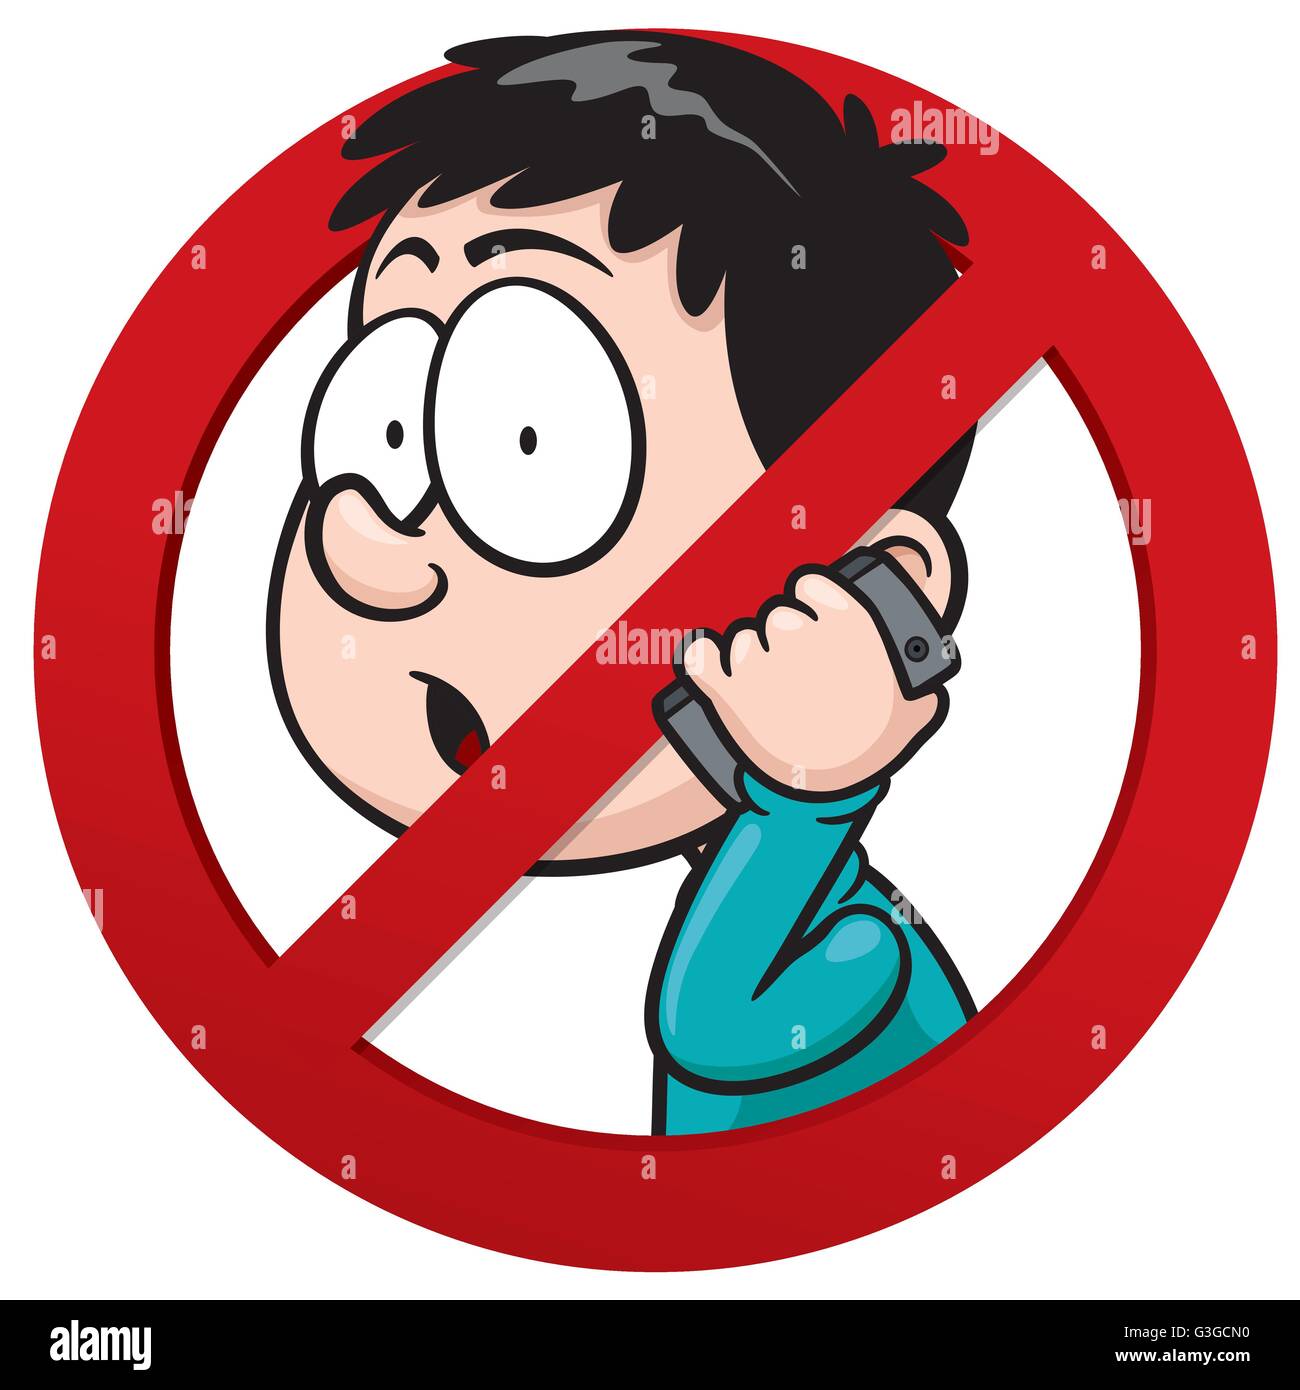 Vector illustration of No phone receiver sign Stock Vector